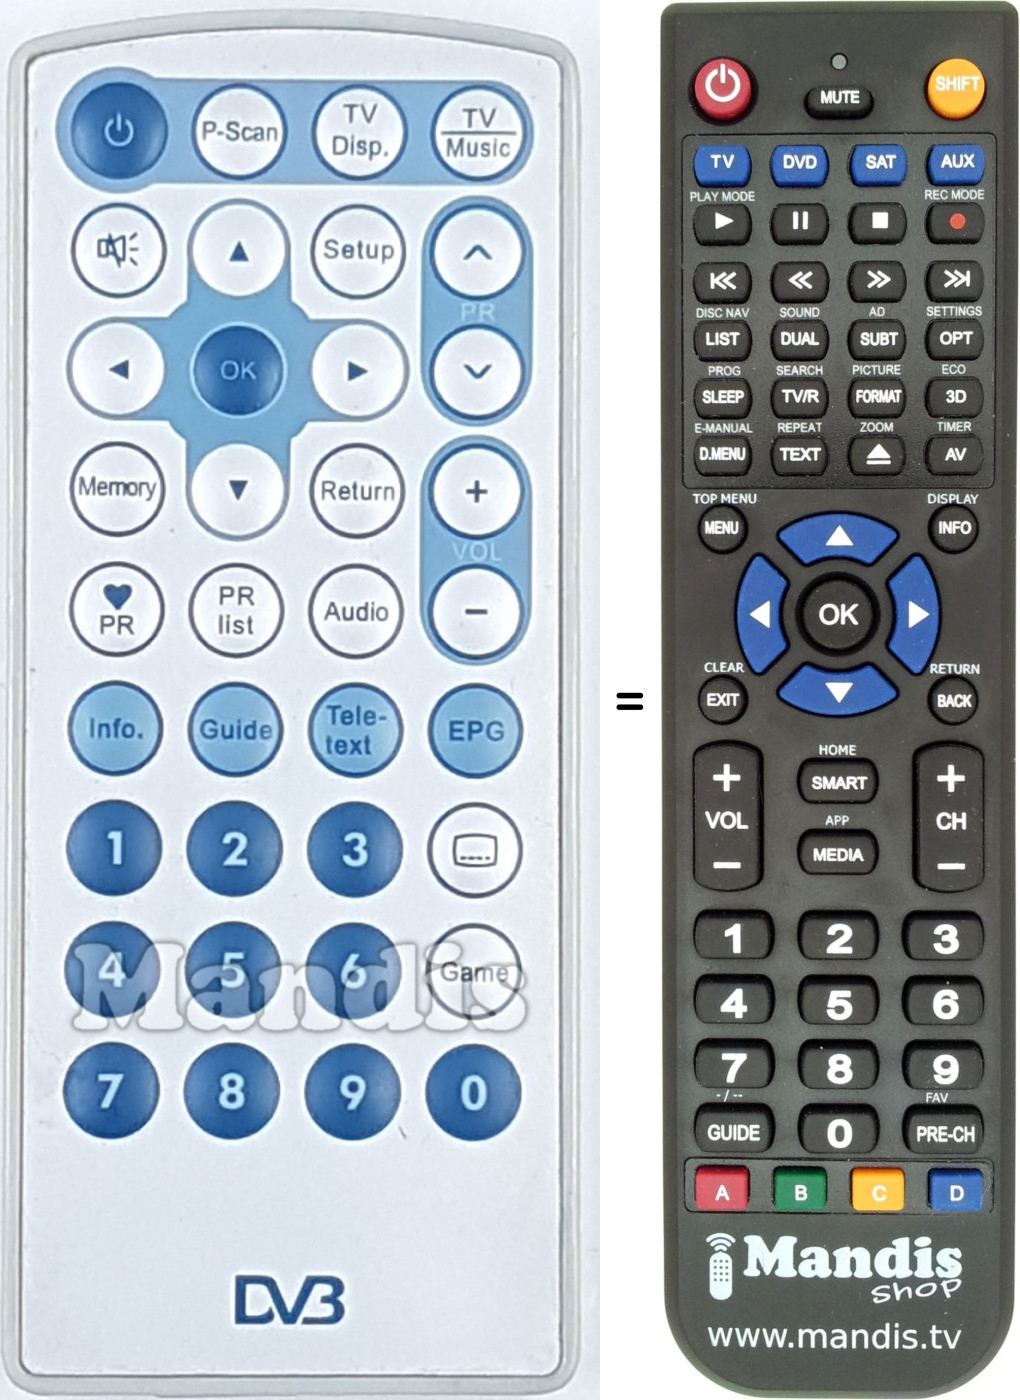 Replacement remote control DVB001